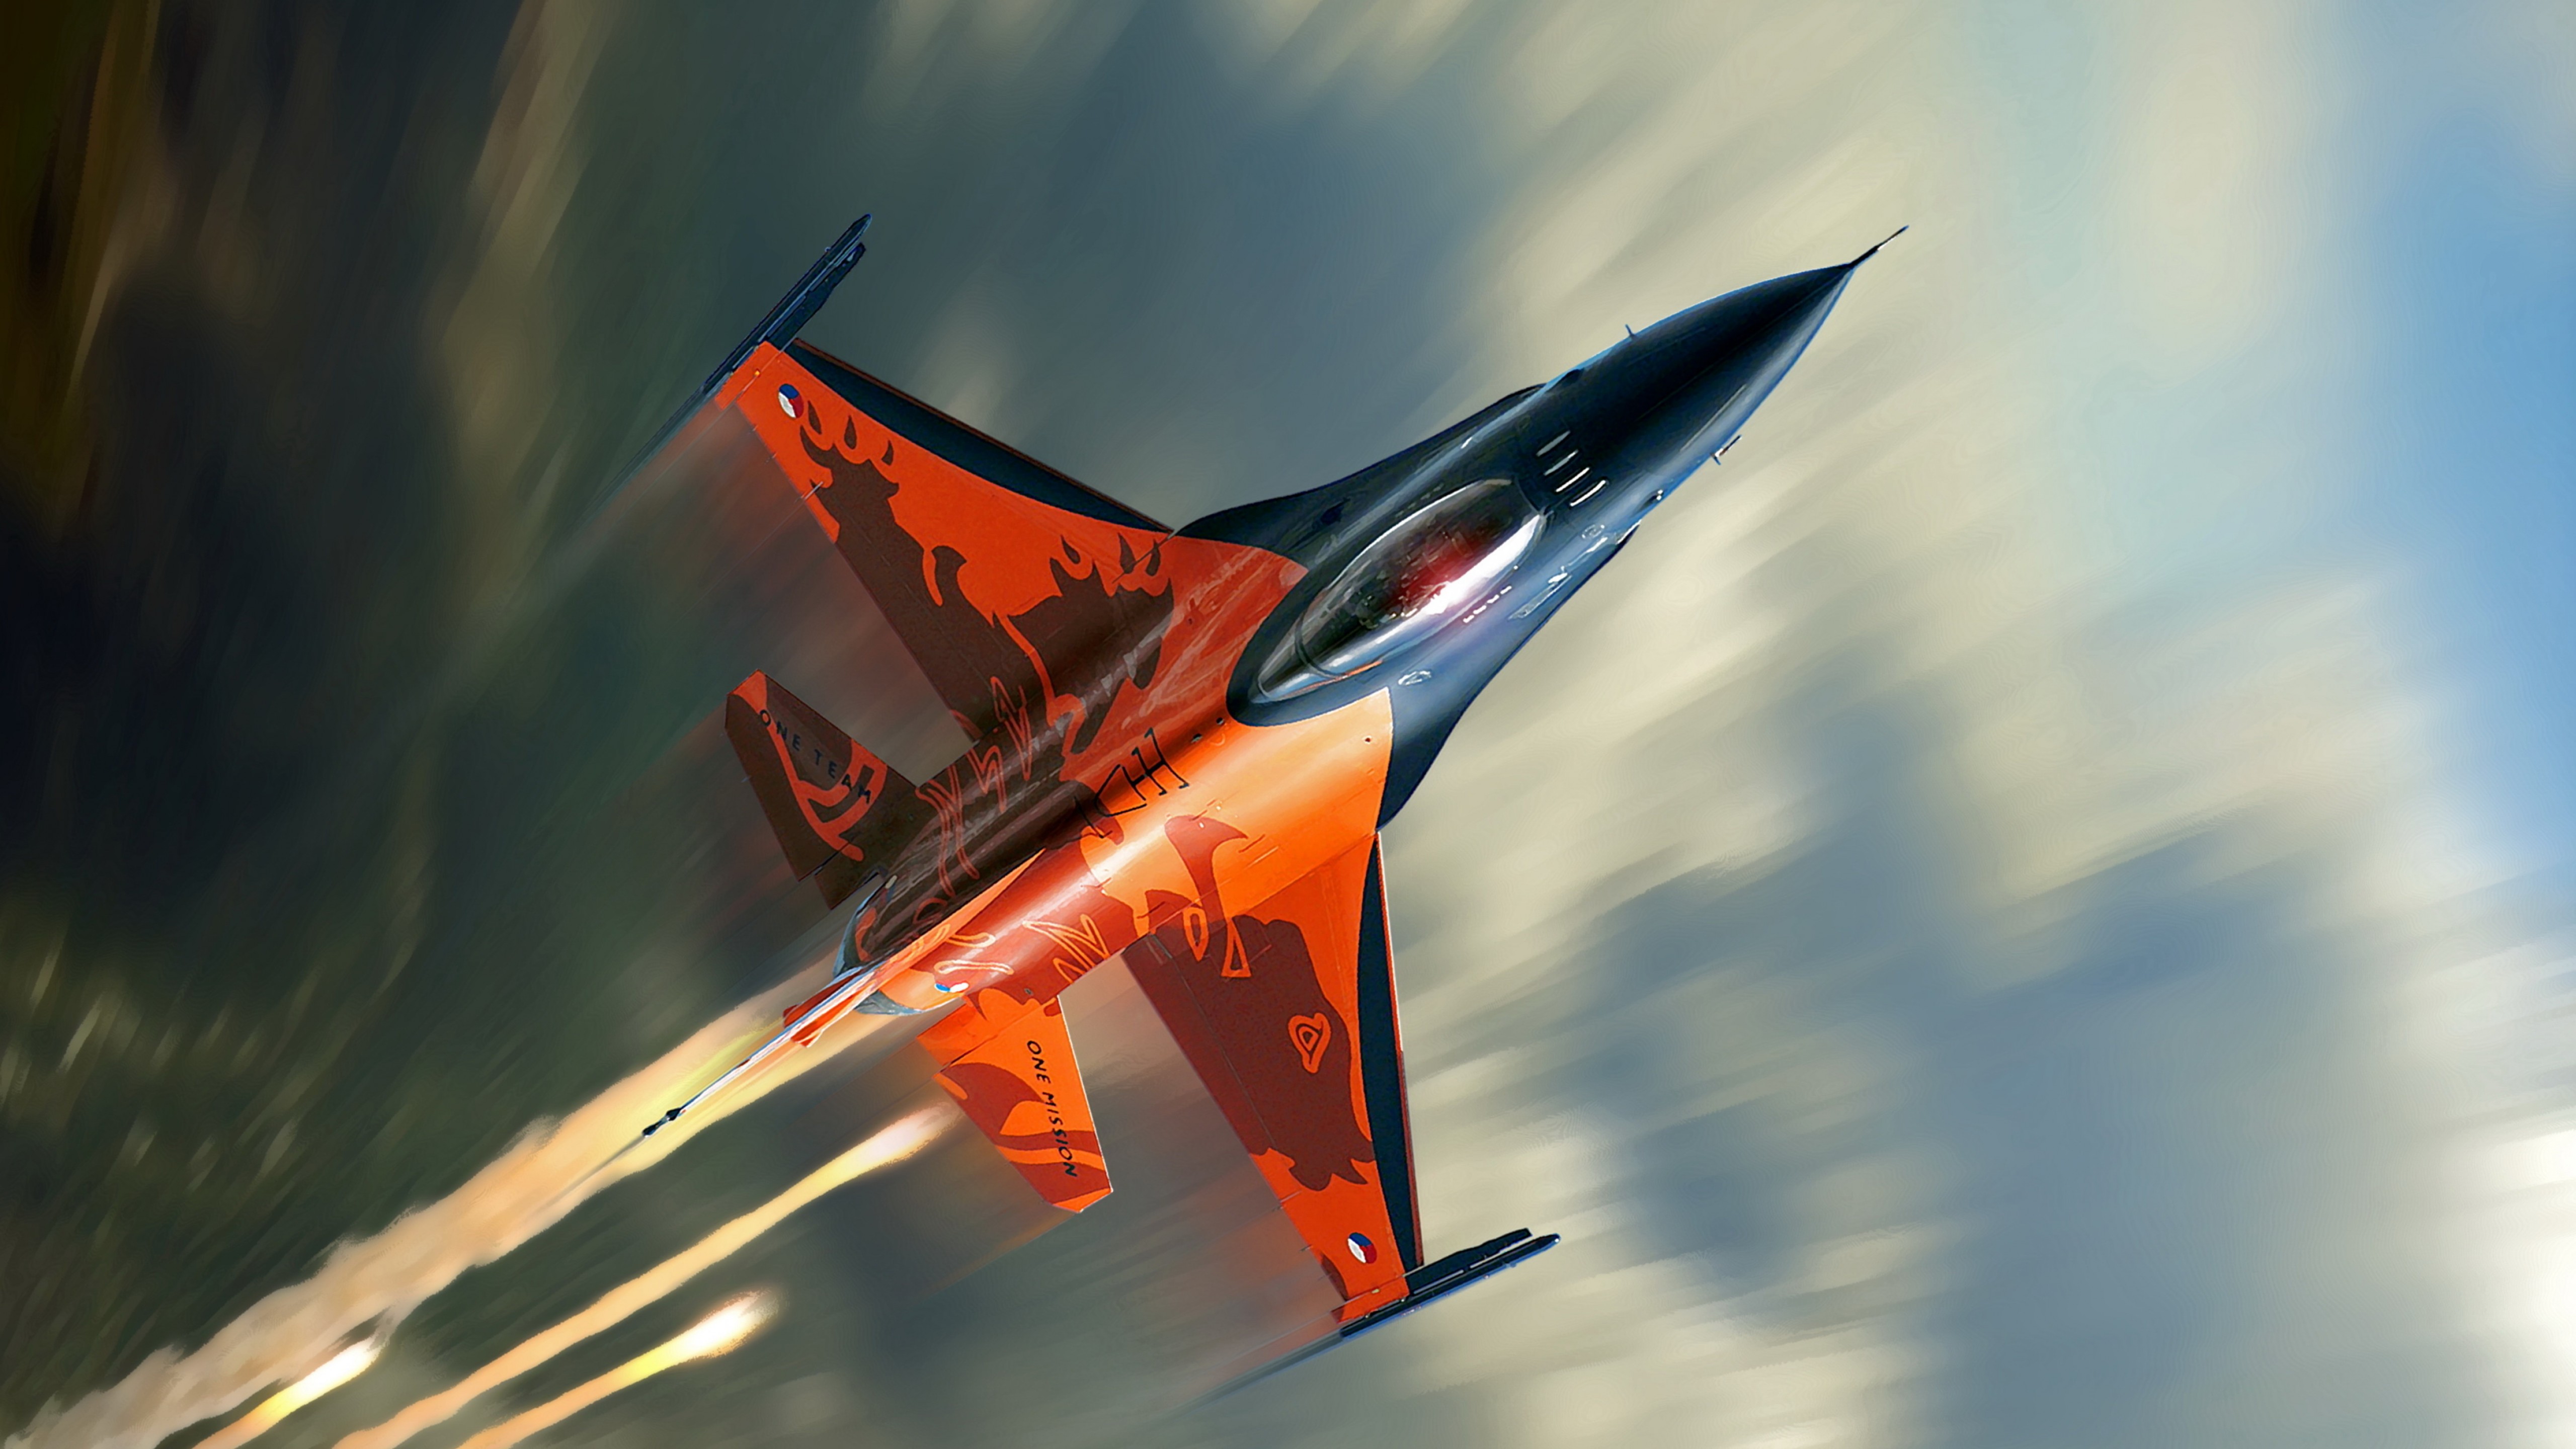 F 16 Falcon Fighter Jet Aircraft Us Air Force Wallpaper HD For Mobile Phone 5120x2880, Wallpaper13.com